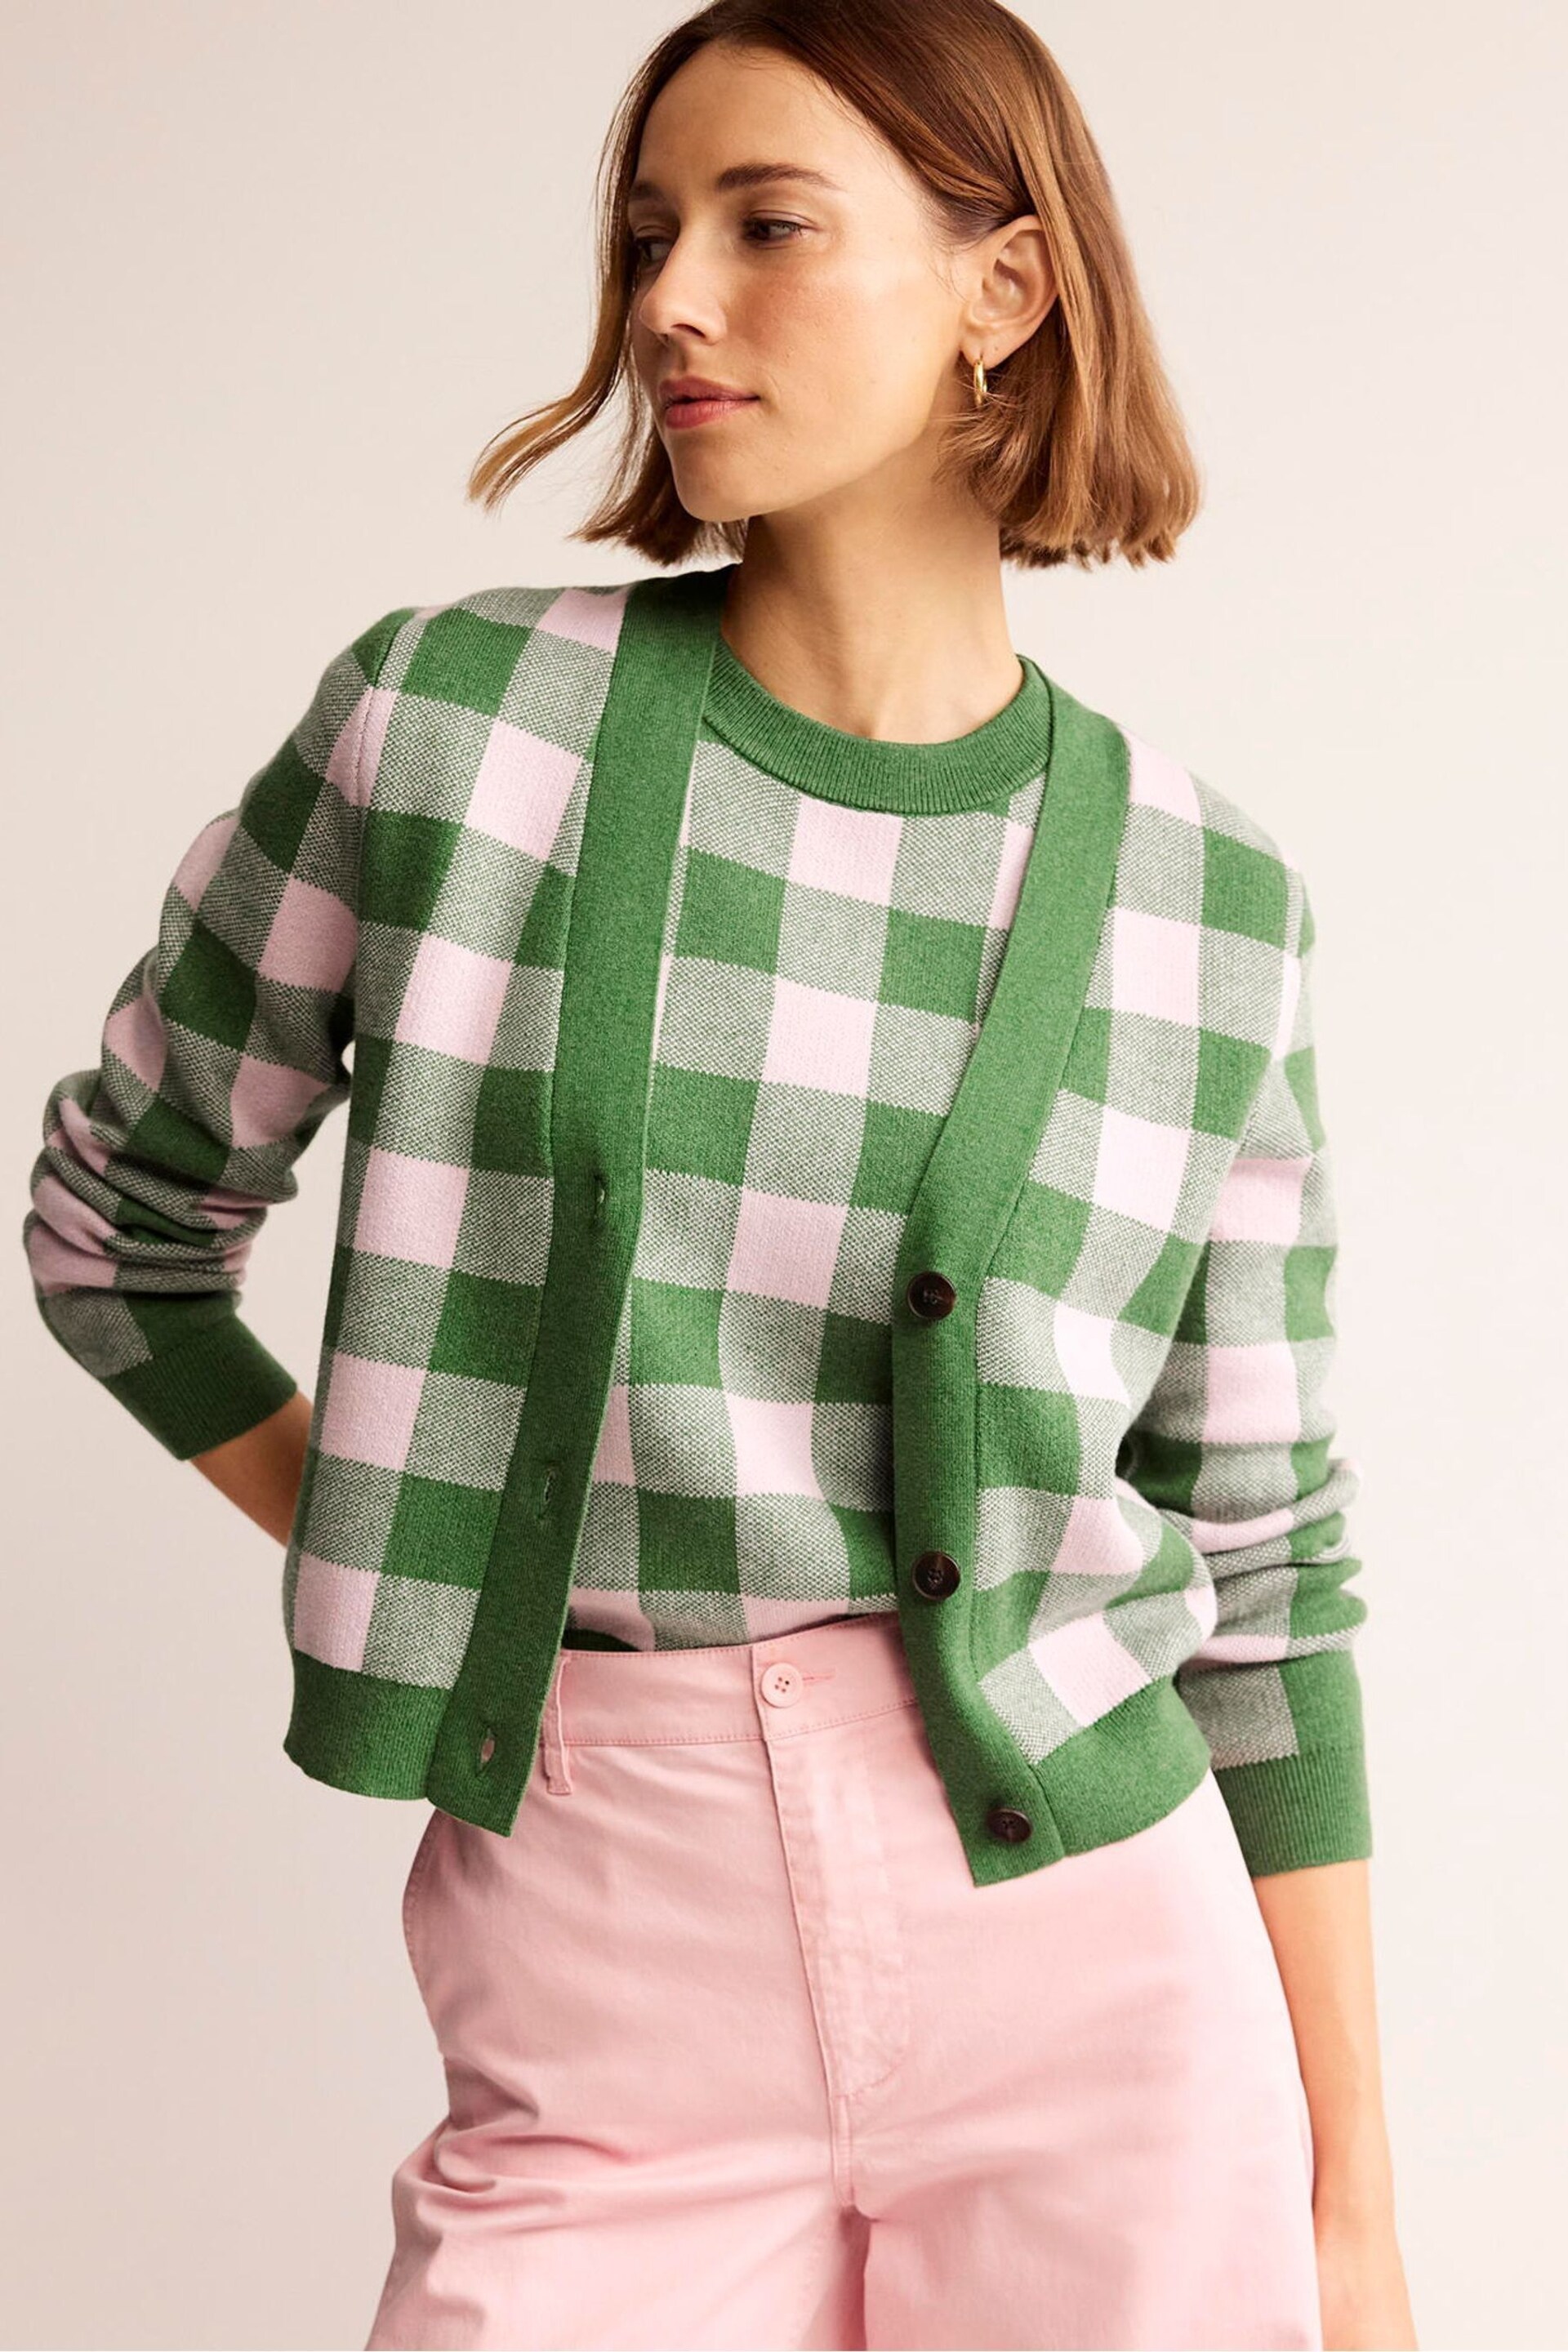 Boden Green Gingham Cardigan - Image 4 of 7